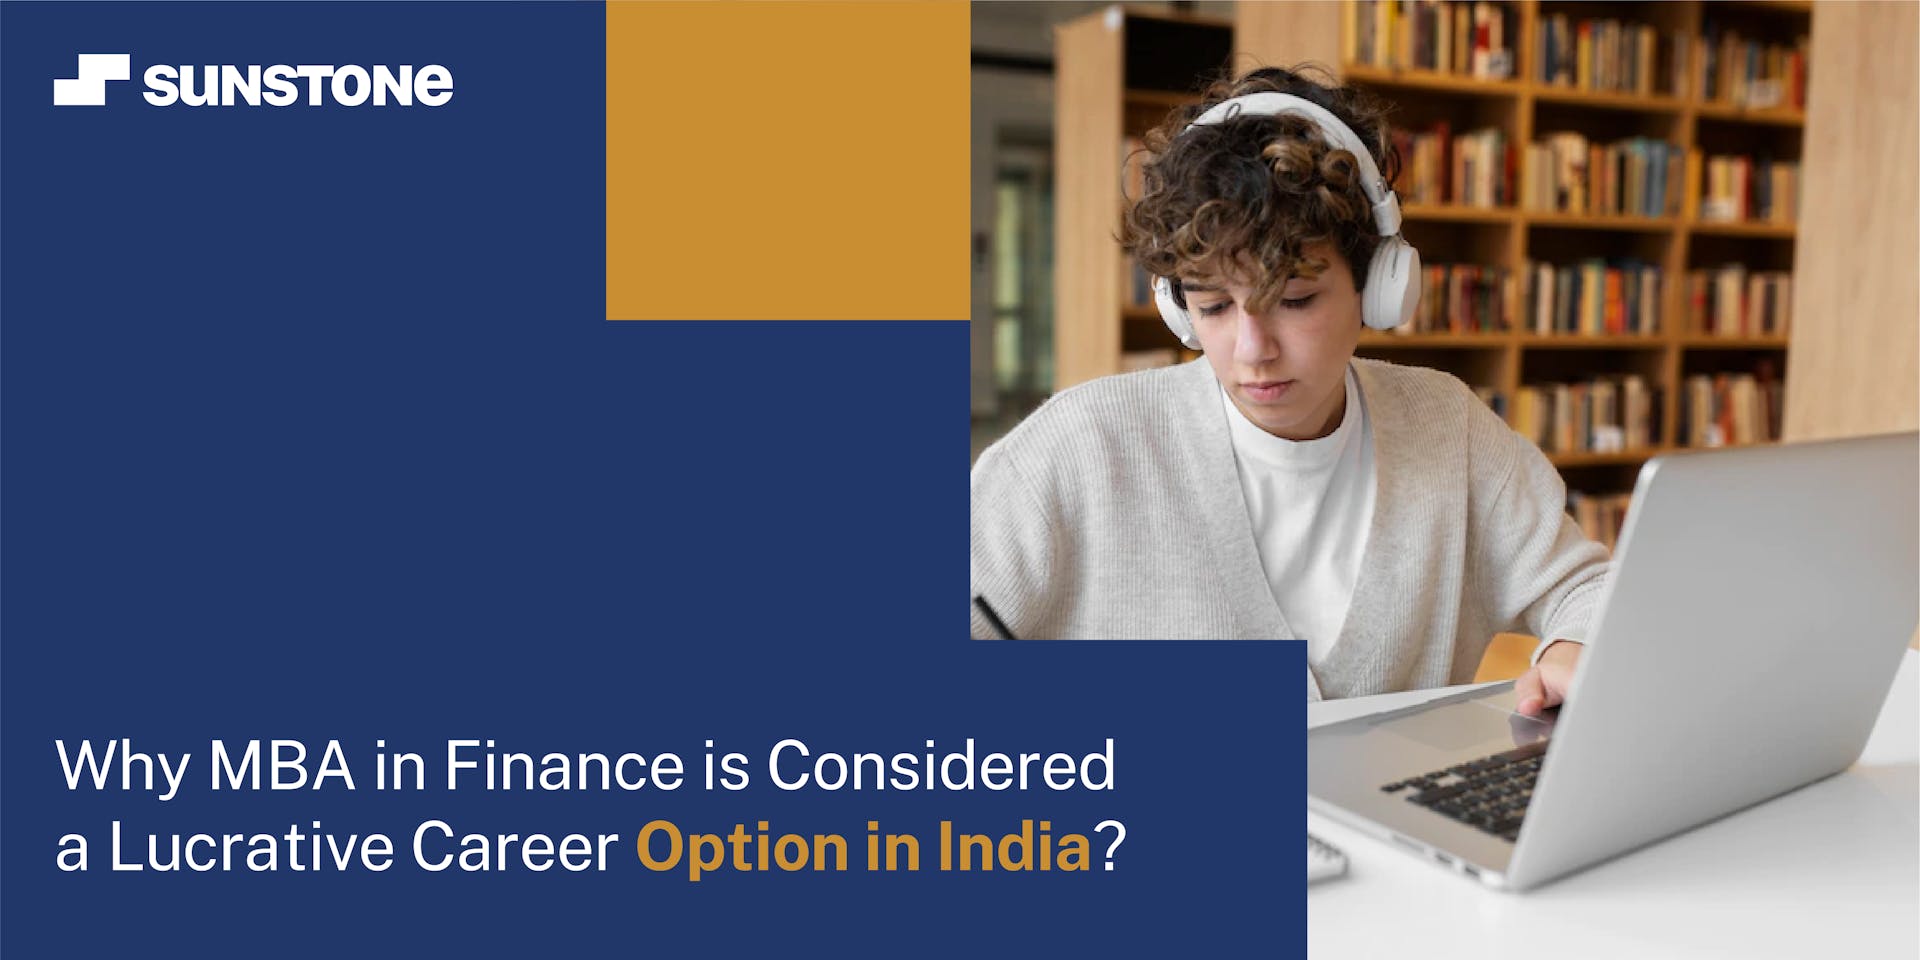 Career After MBA Finance in India: Why is it Considered a Lucrative Option?